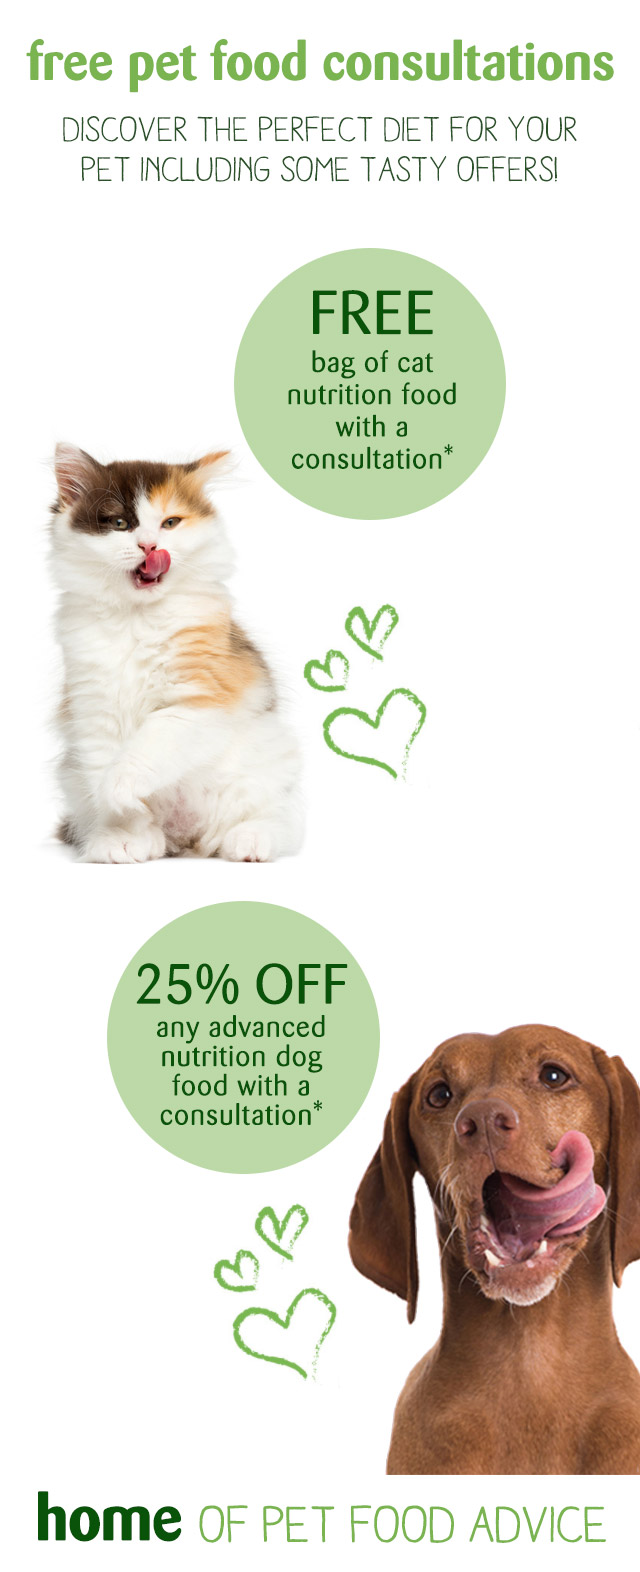 nature diet pets at home